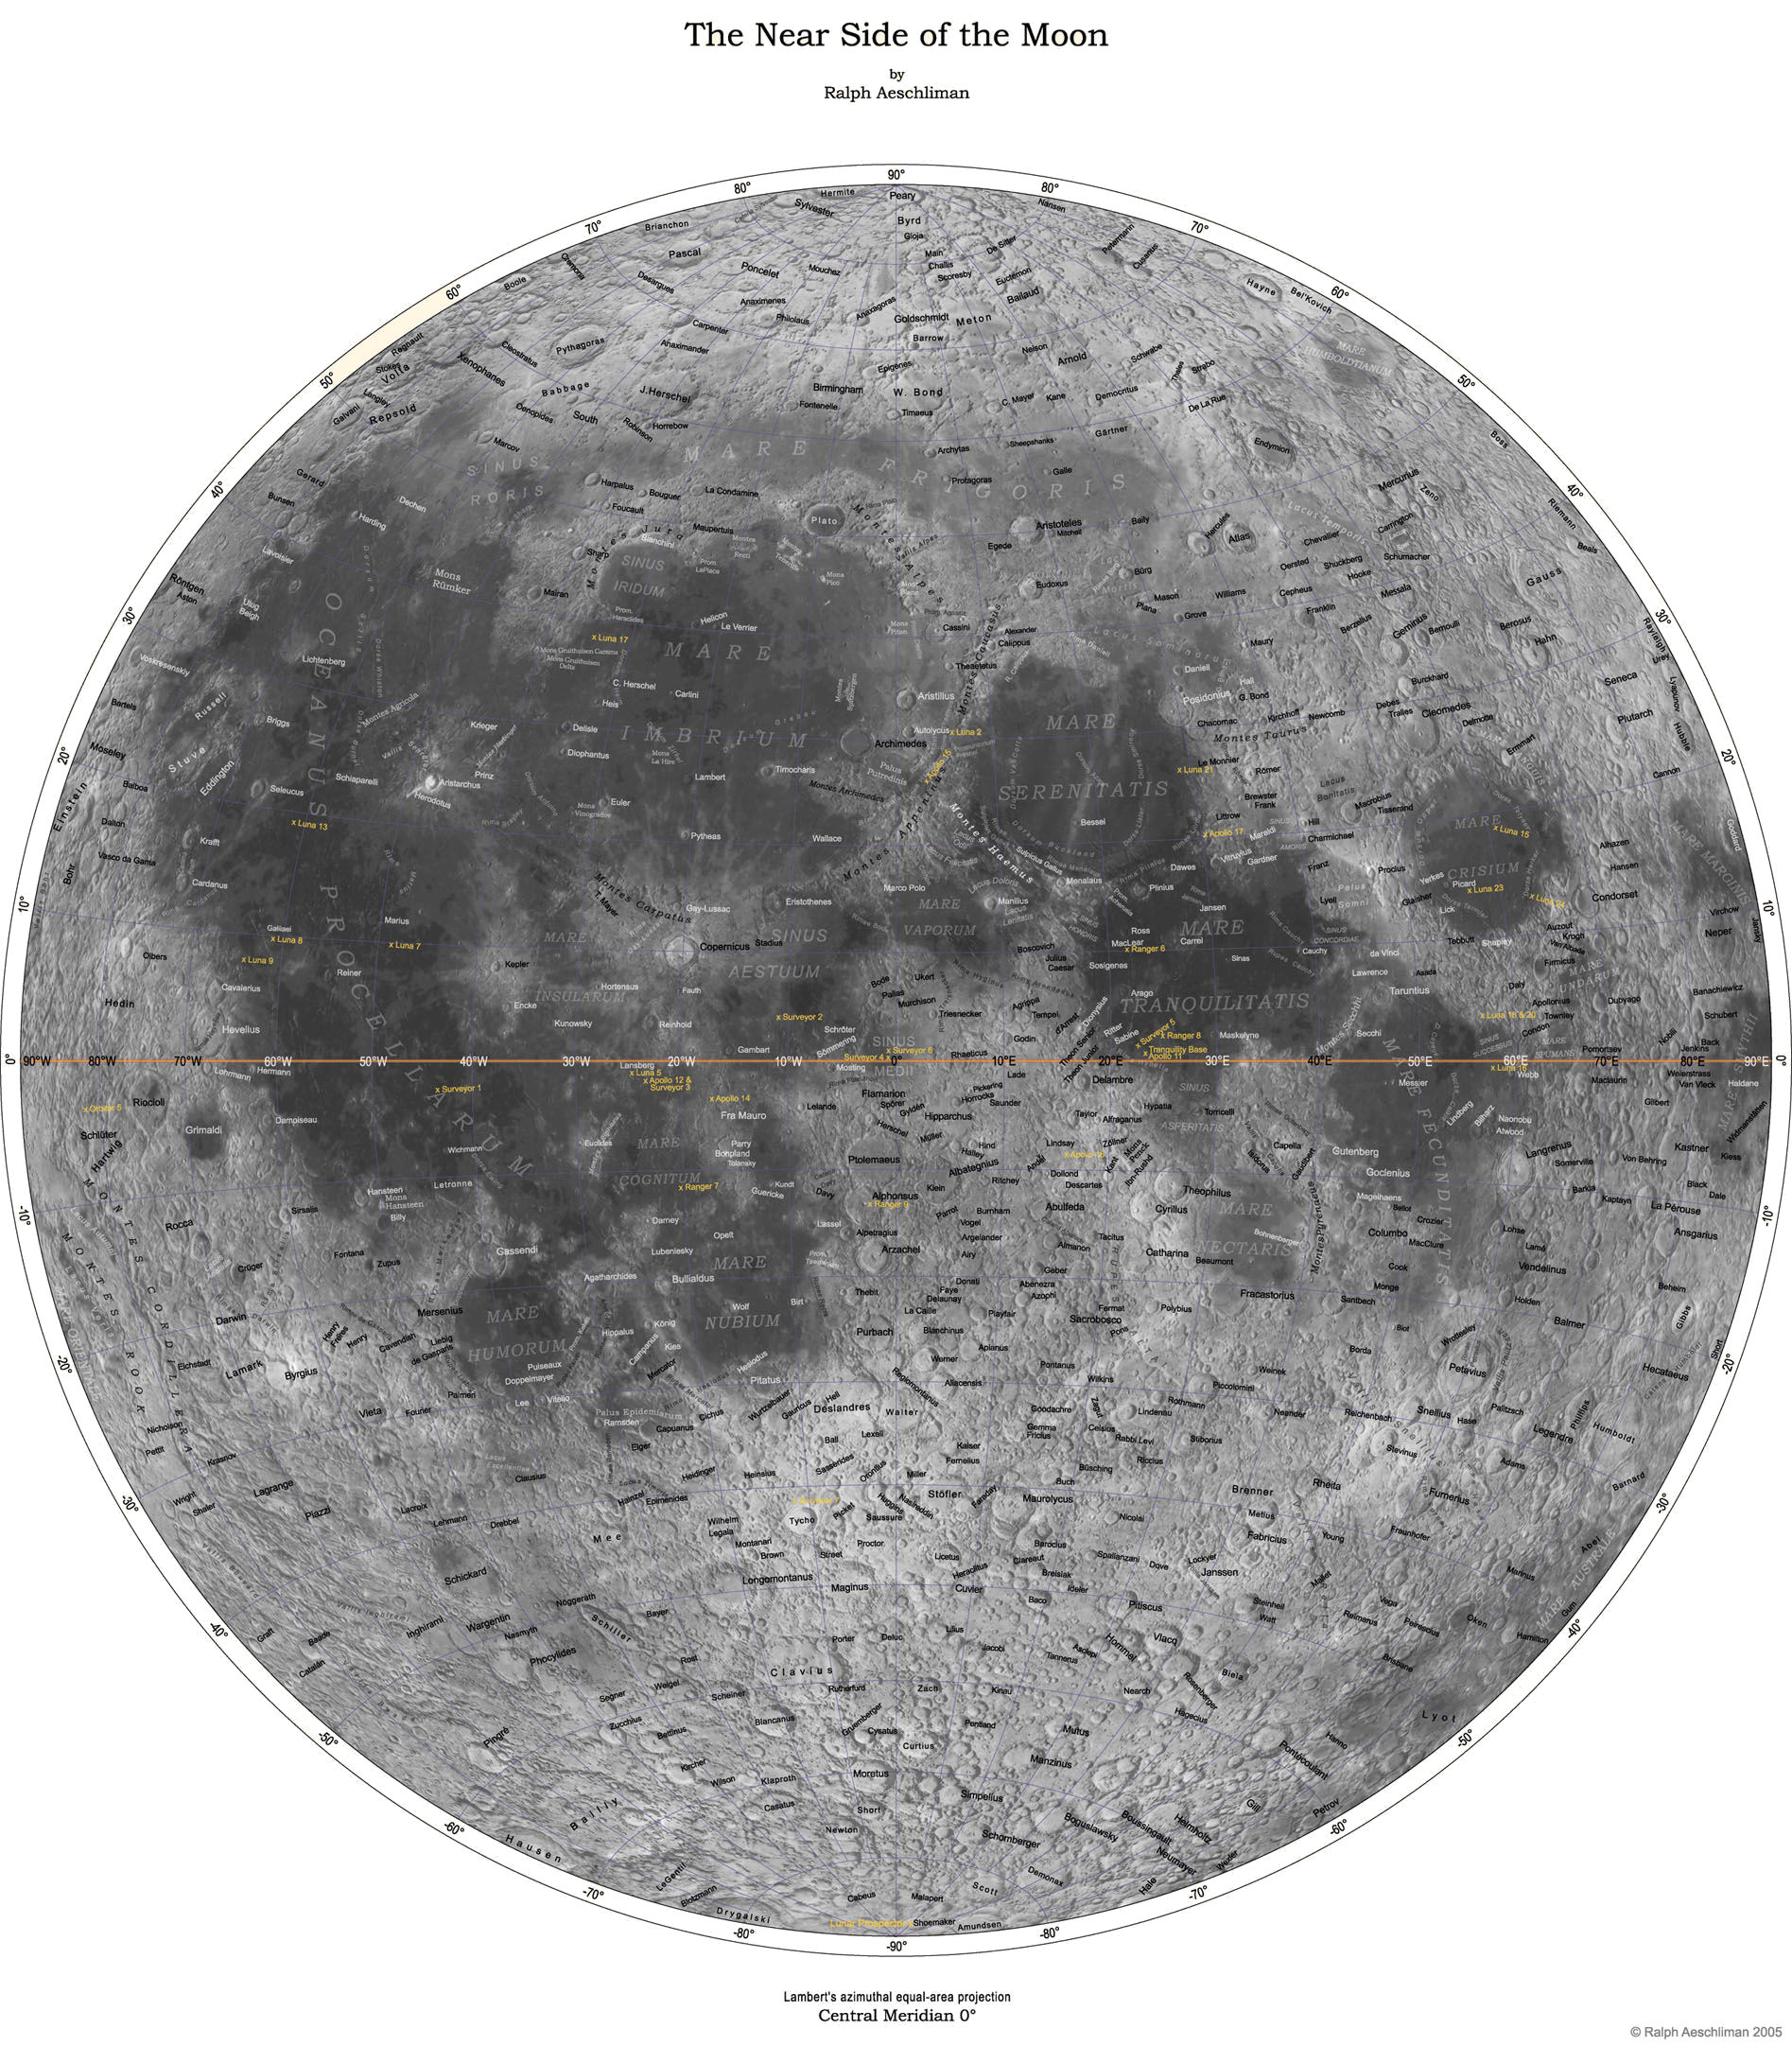 A detailed map of the moon